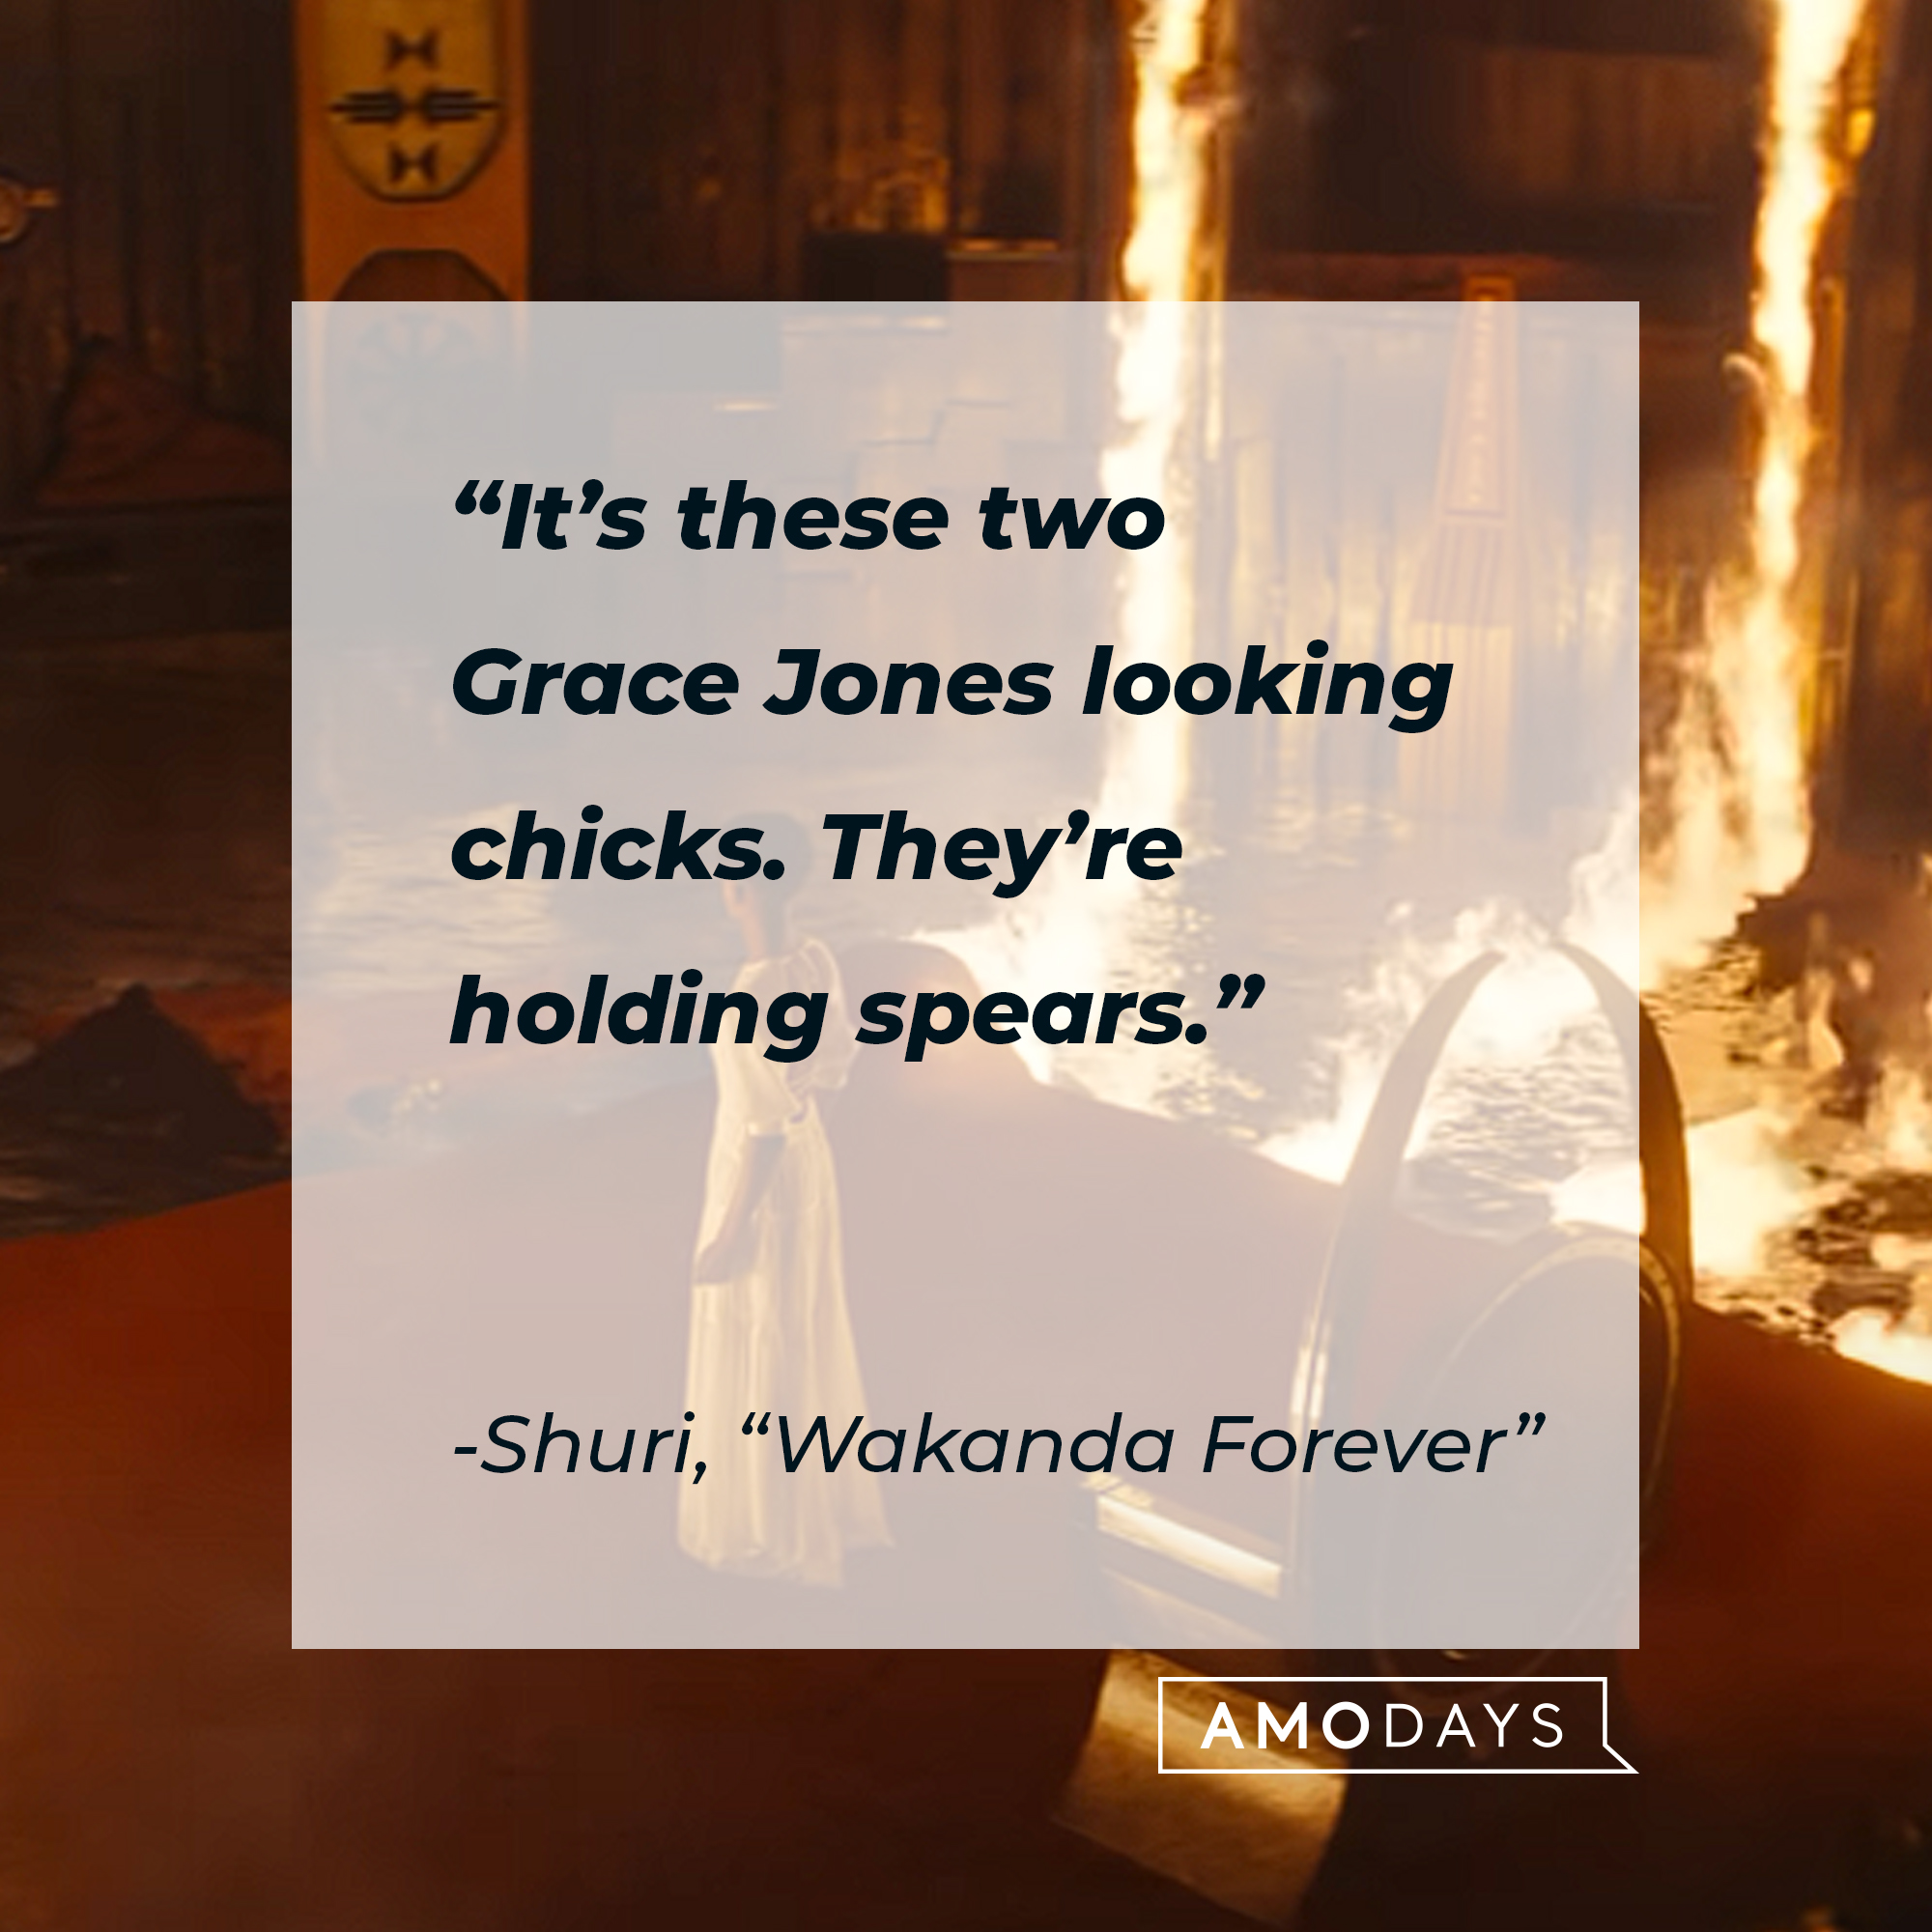 Shuri's quote from "Wakanda Forever:" “It’s these two Grace Jones looking chicks. They’re holding spears.” | Source: Youtube.com/marvel